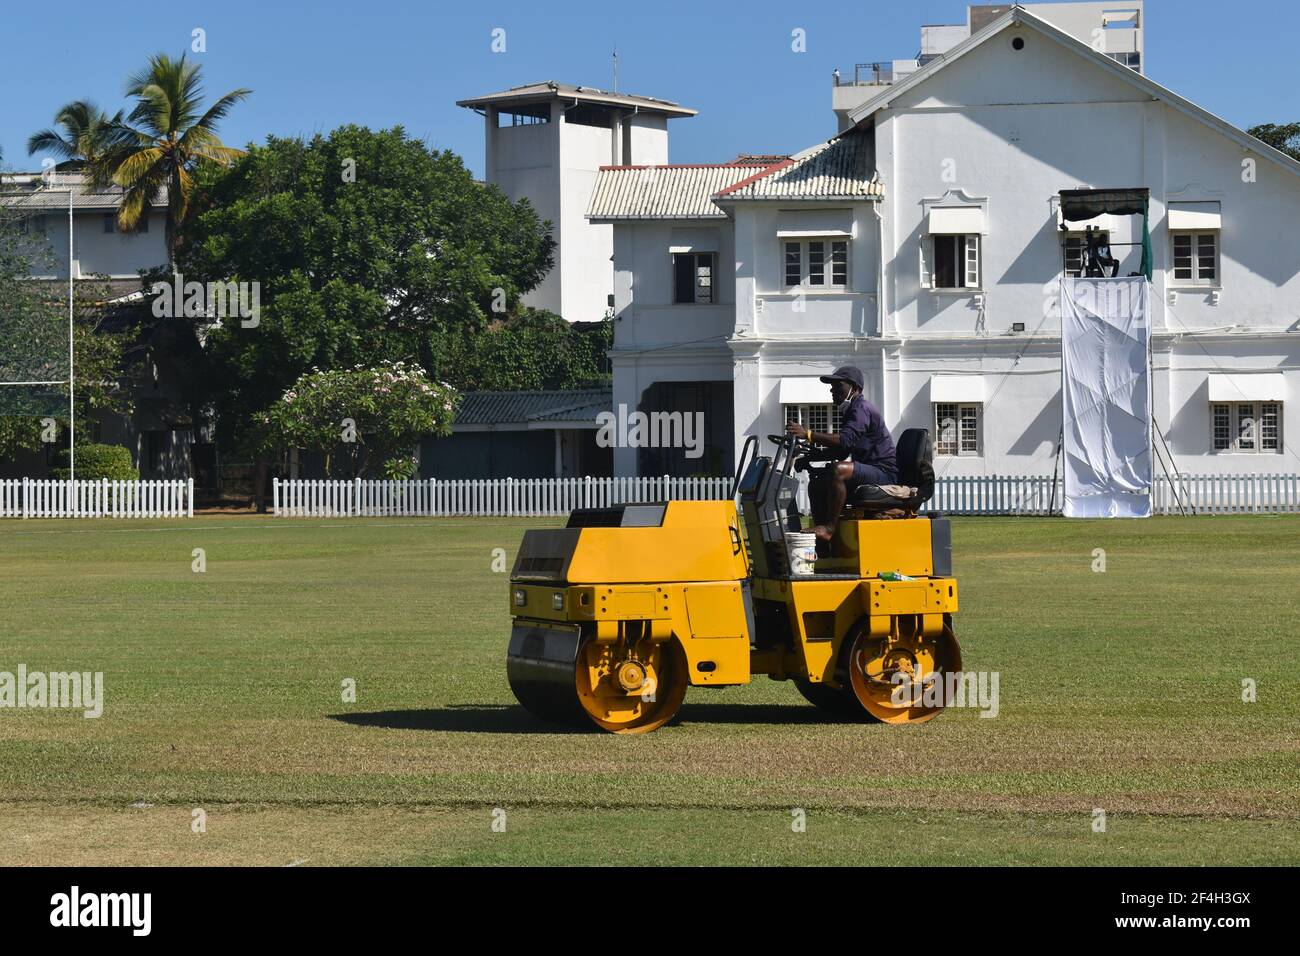 A roller machine in action. Ground staff preparing the turf wicket and ground for a cricket match at the picturistic school cricket ground. St. Thomas College, Mt. Lavinia. Colombo. Sri Lanka. Stock Photo